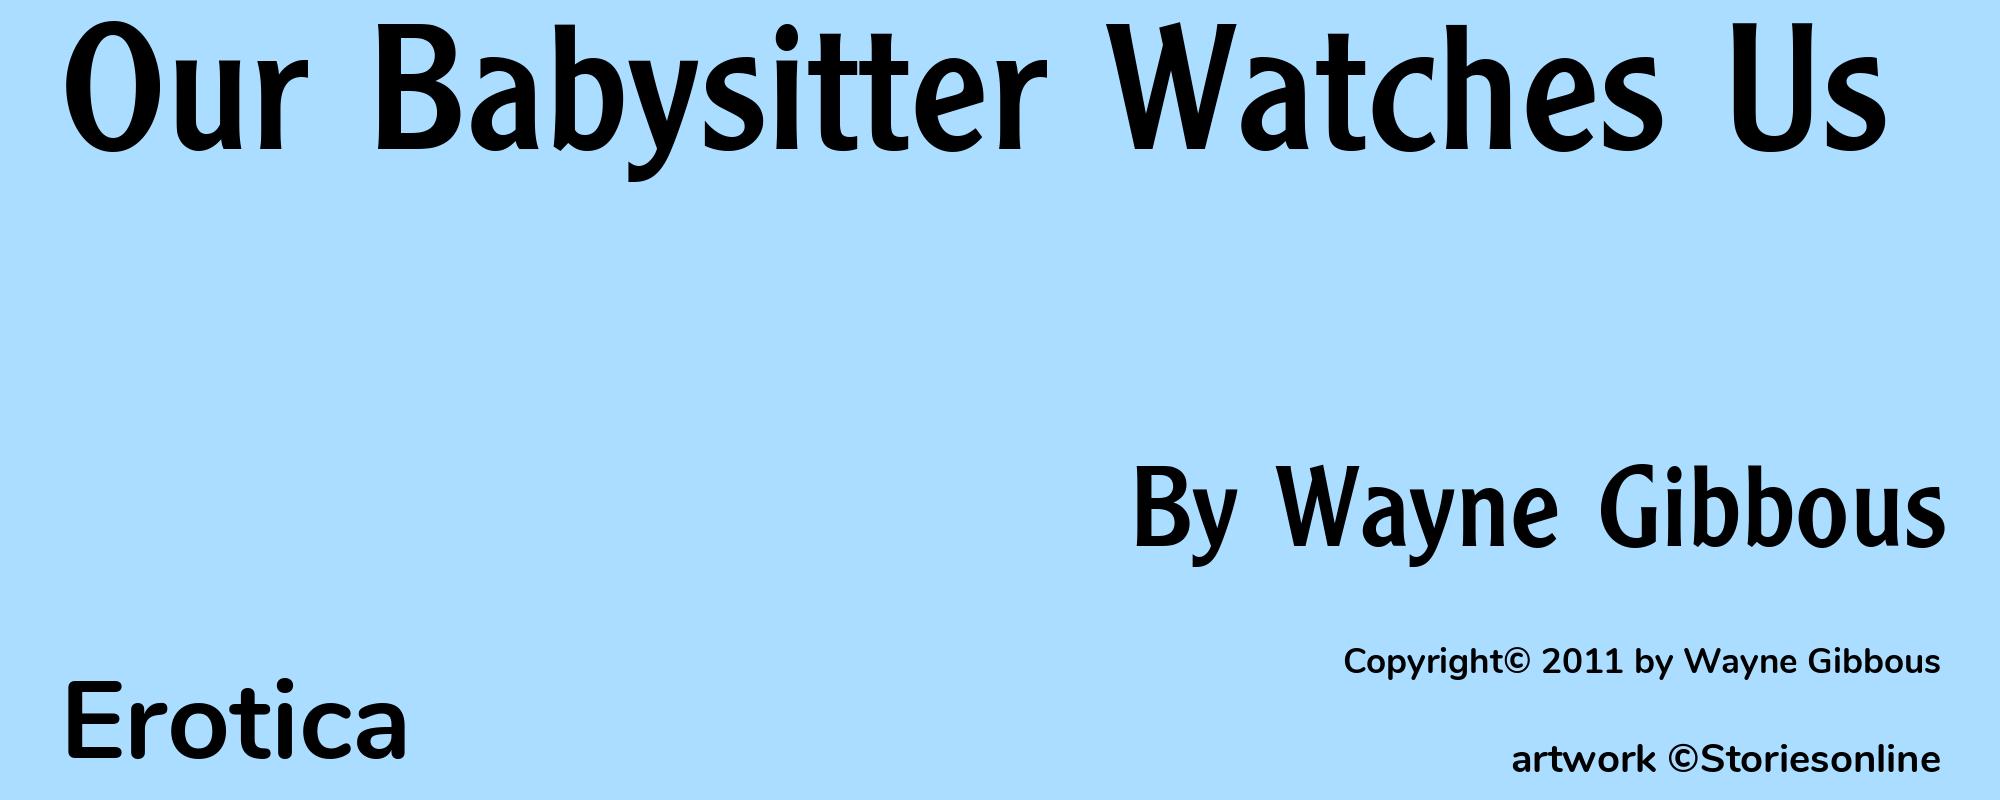 Our Babysitter Watches Us - Cover